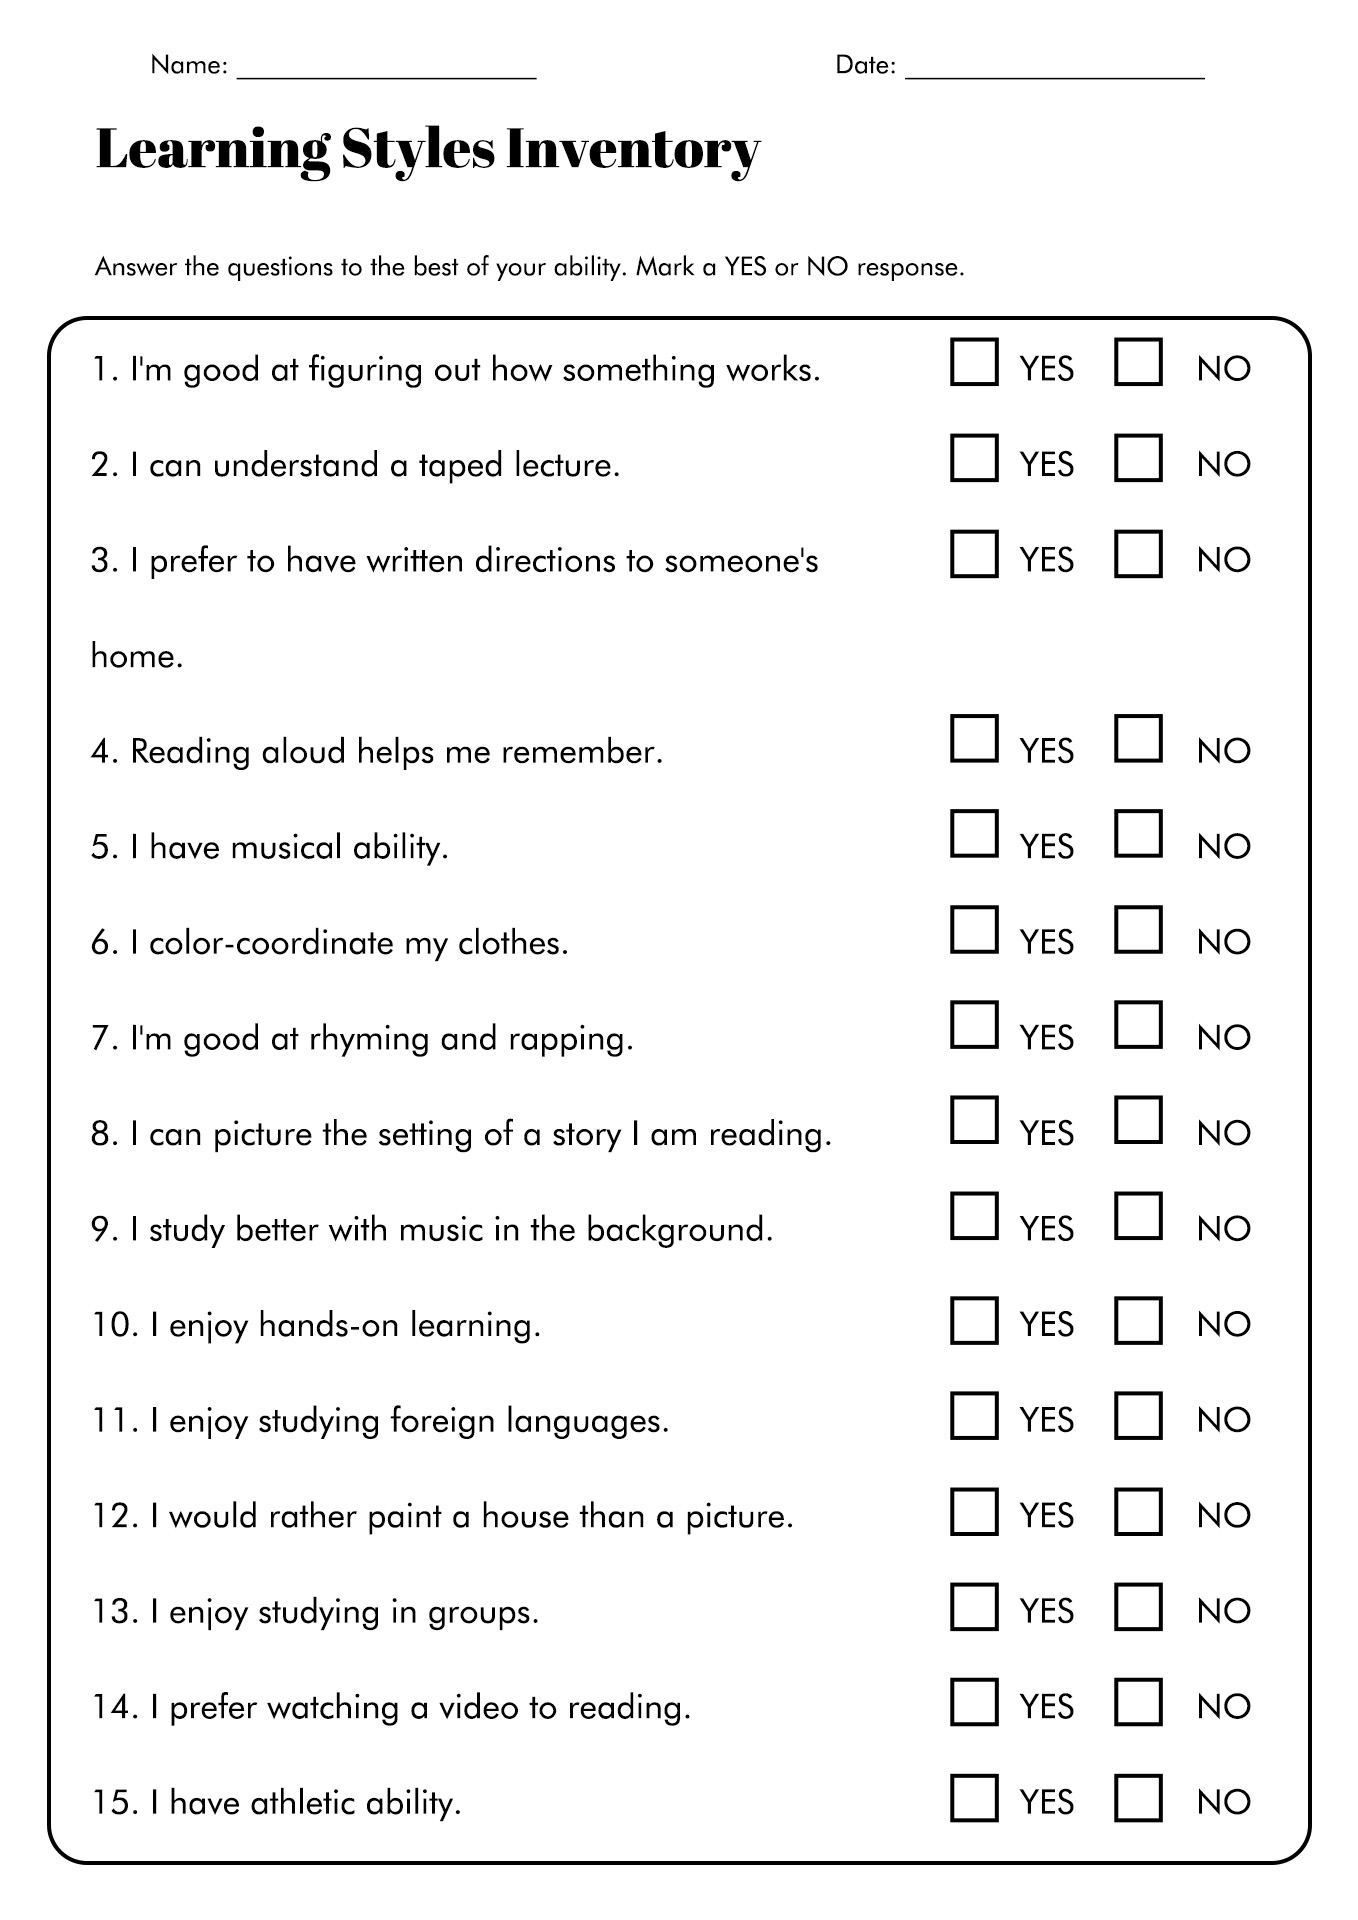 questionnaire-learning-styles-quiz-printable-sharedoc-gambaran